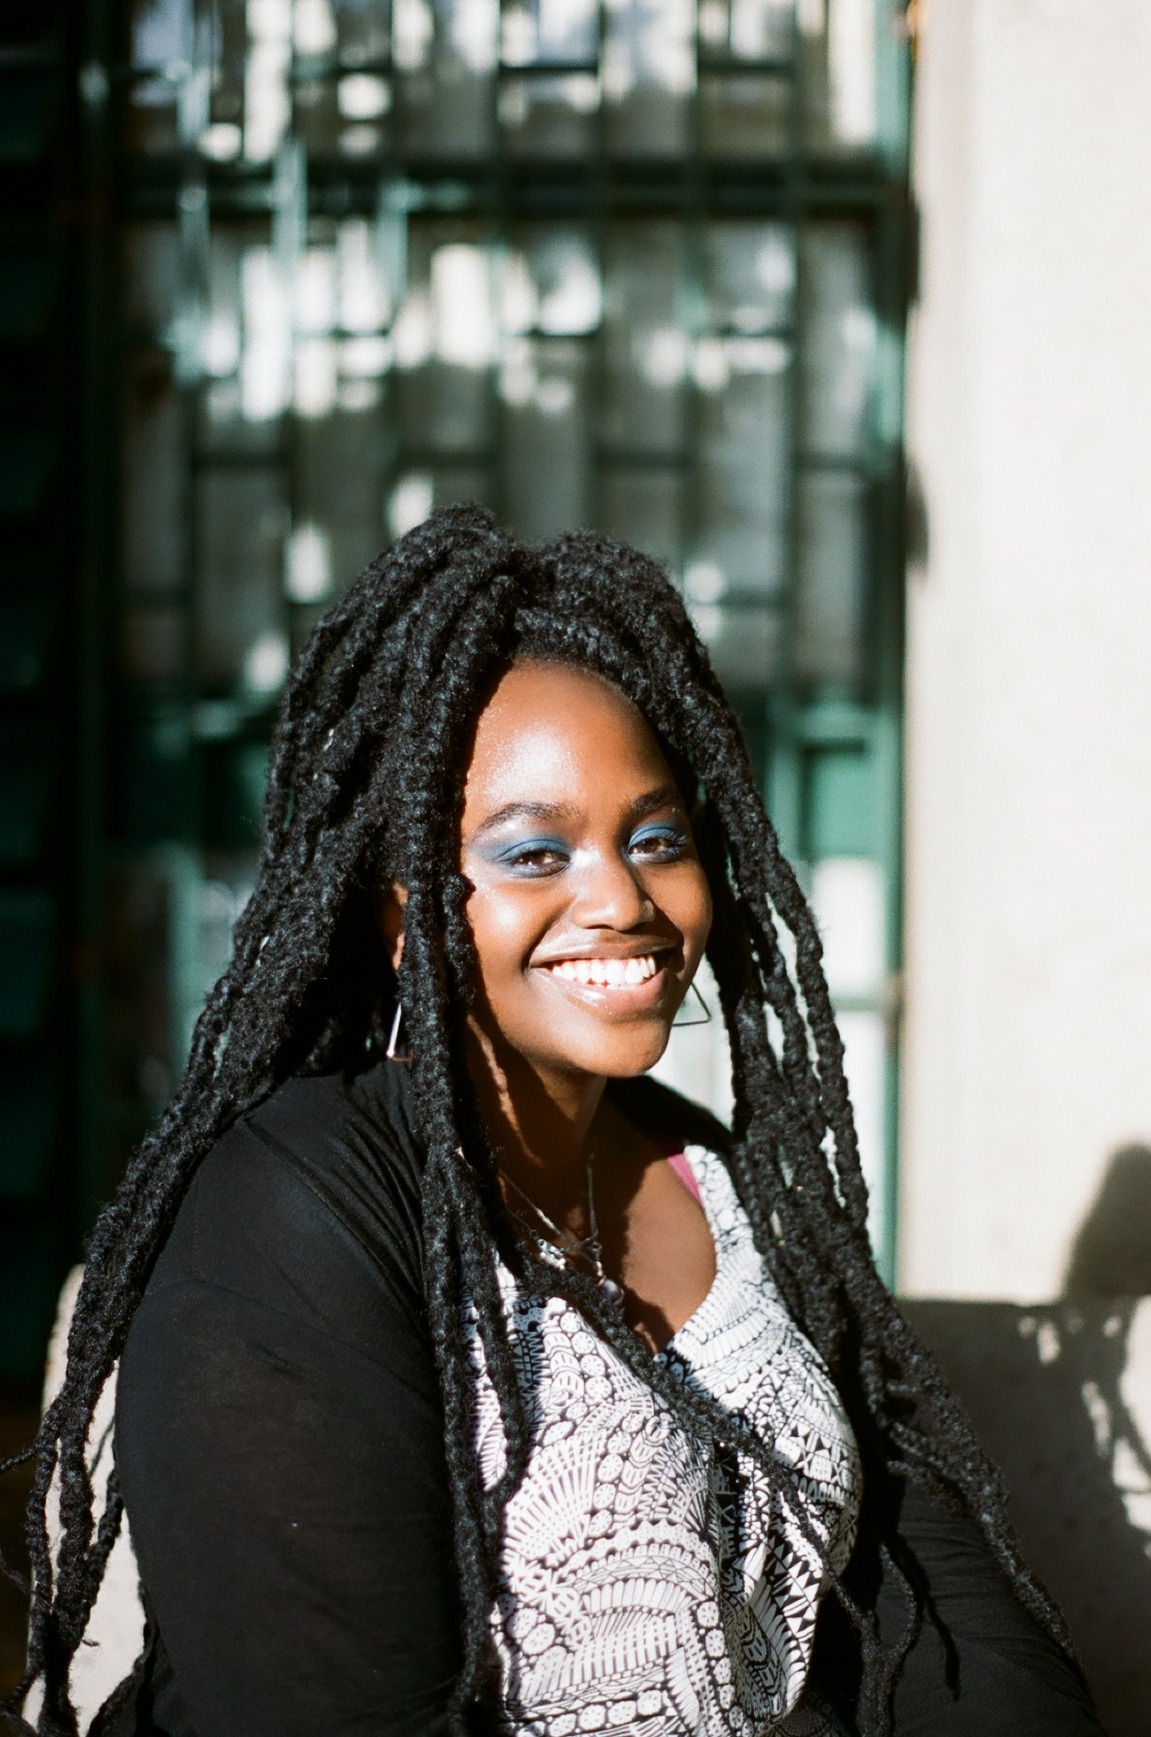 Photo portrait of young African woman smiling with braids and bright blue eye make-up, a white top and black blouse over it.